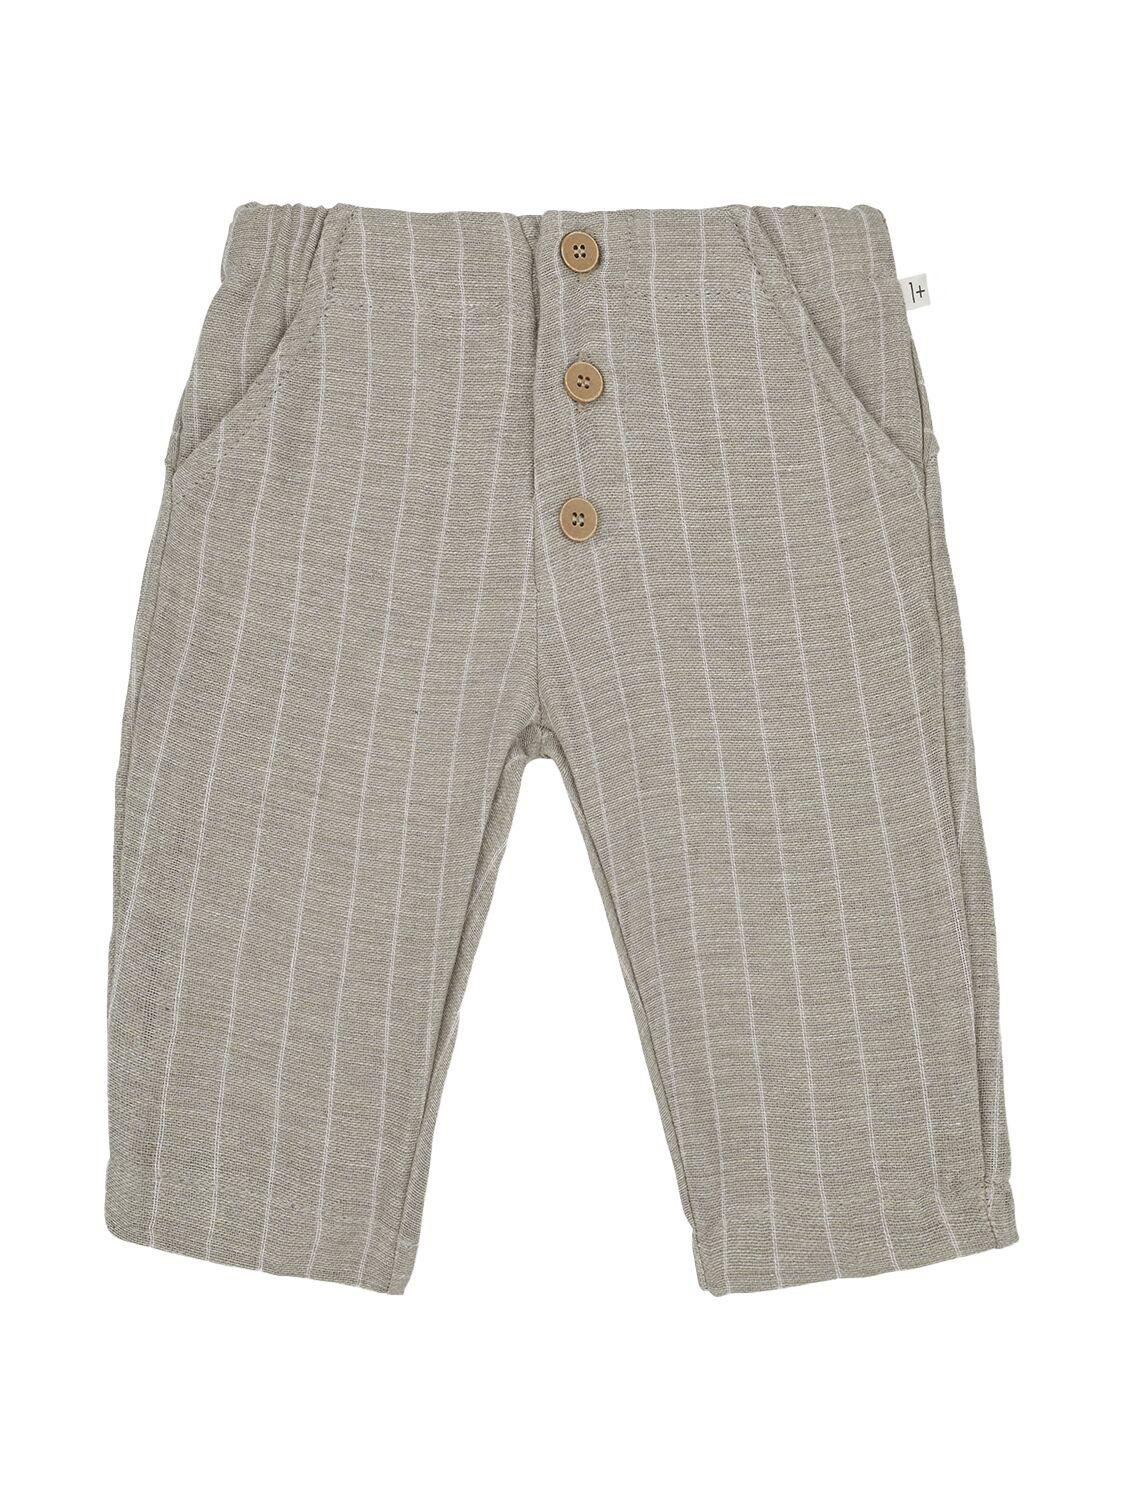 Cotton Pants by 1 + IN THE FAMILY